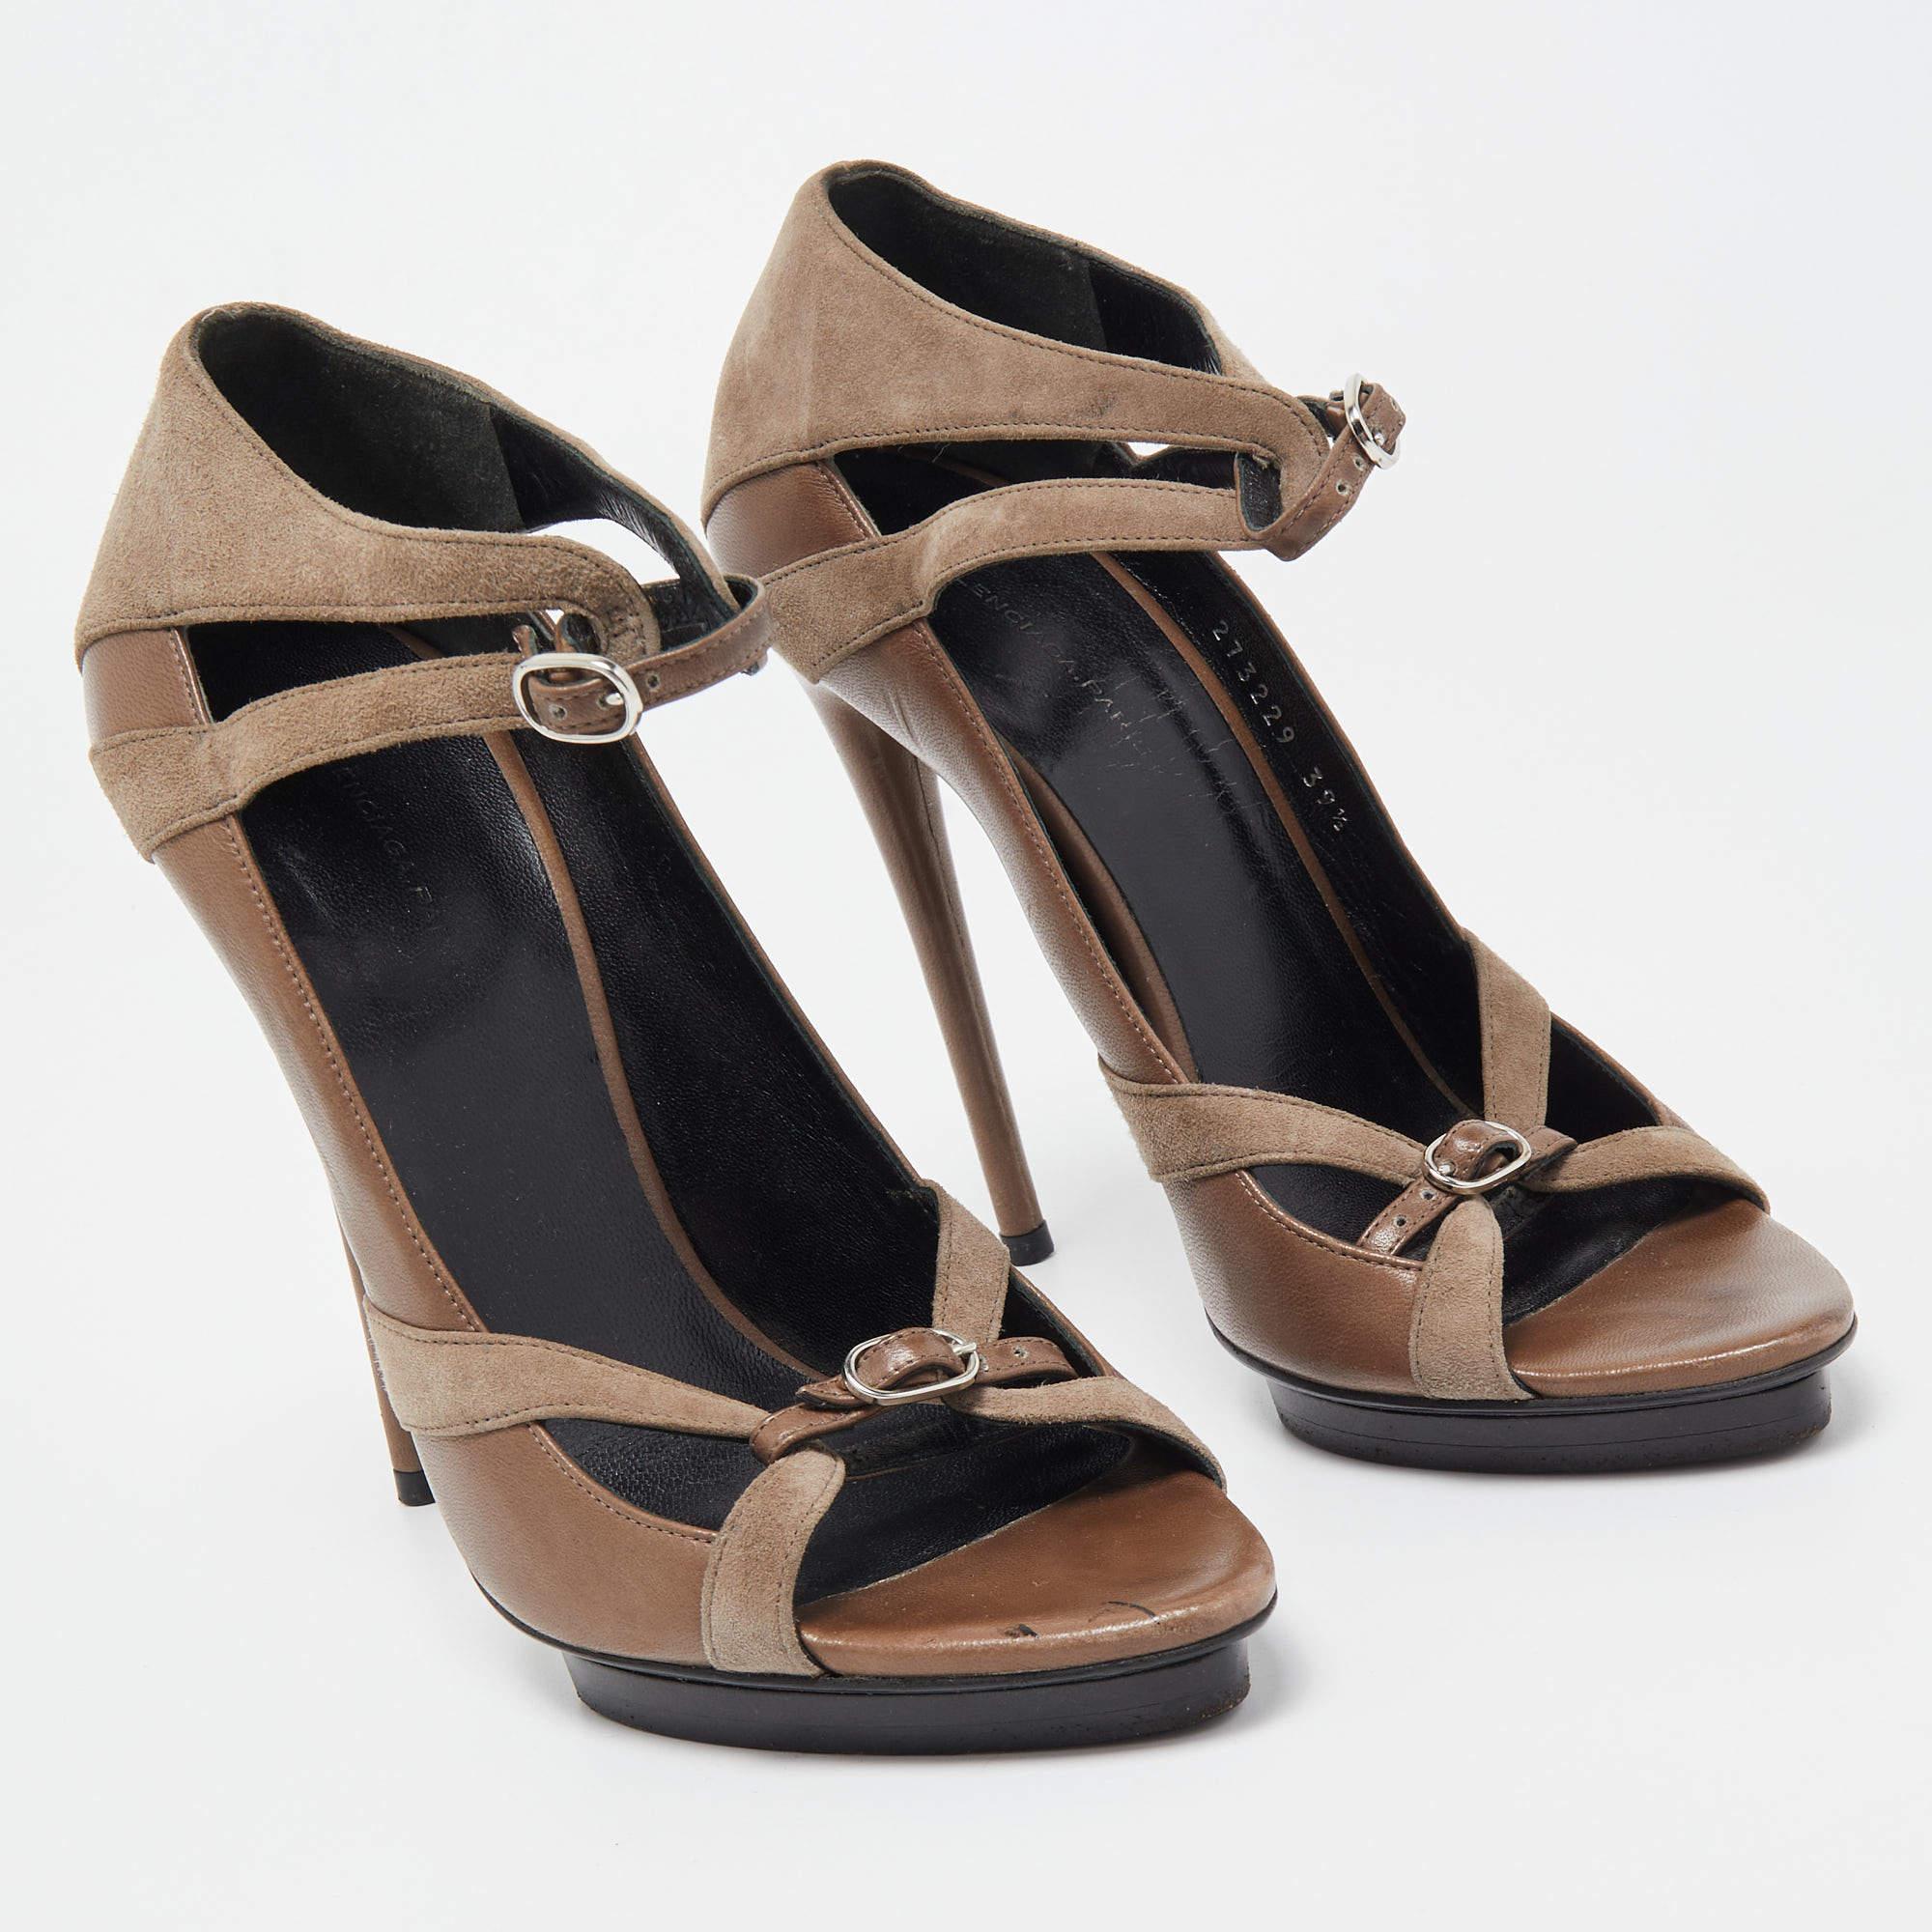 Balenciaga Grey/Brown Suede and Leather Buckle Pumps Size 39.5 For Sale 1